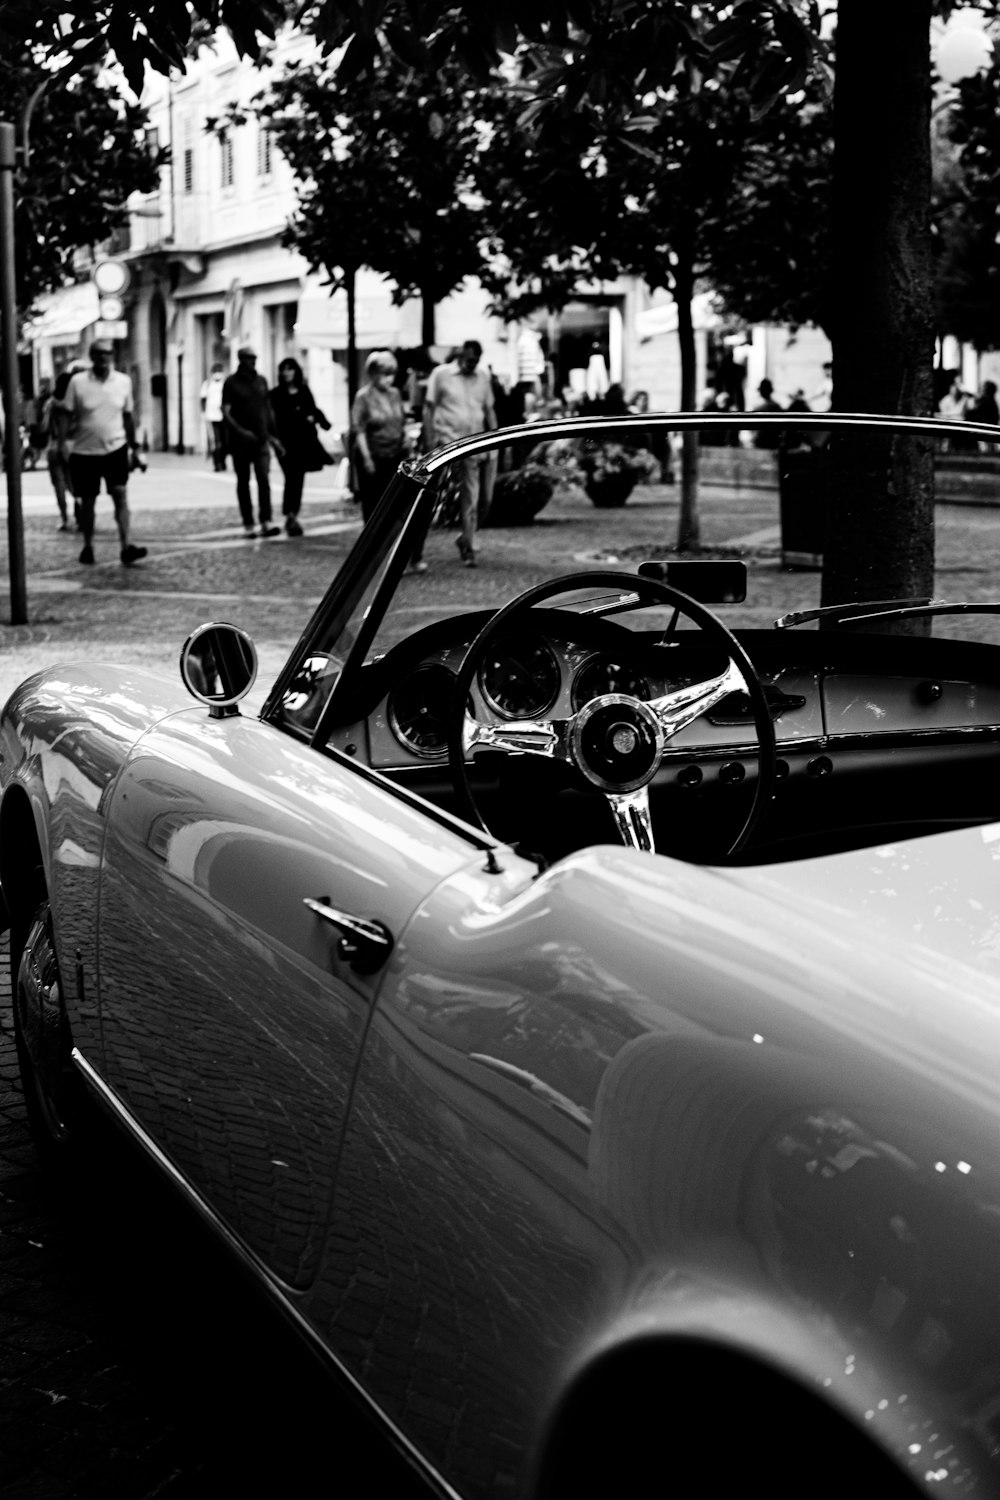 a black and white photo of a convertible car